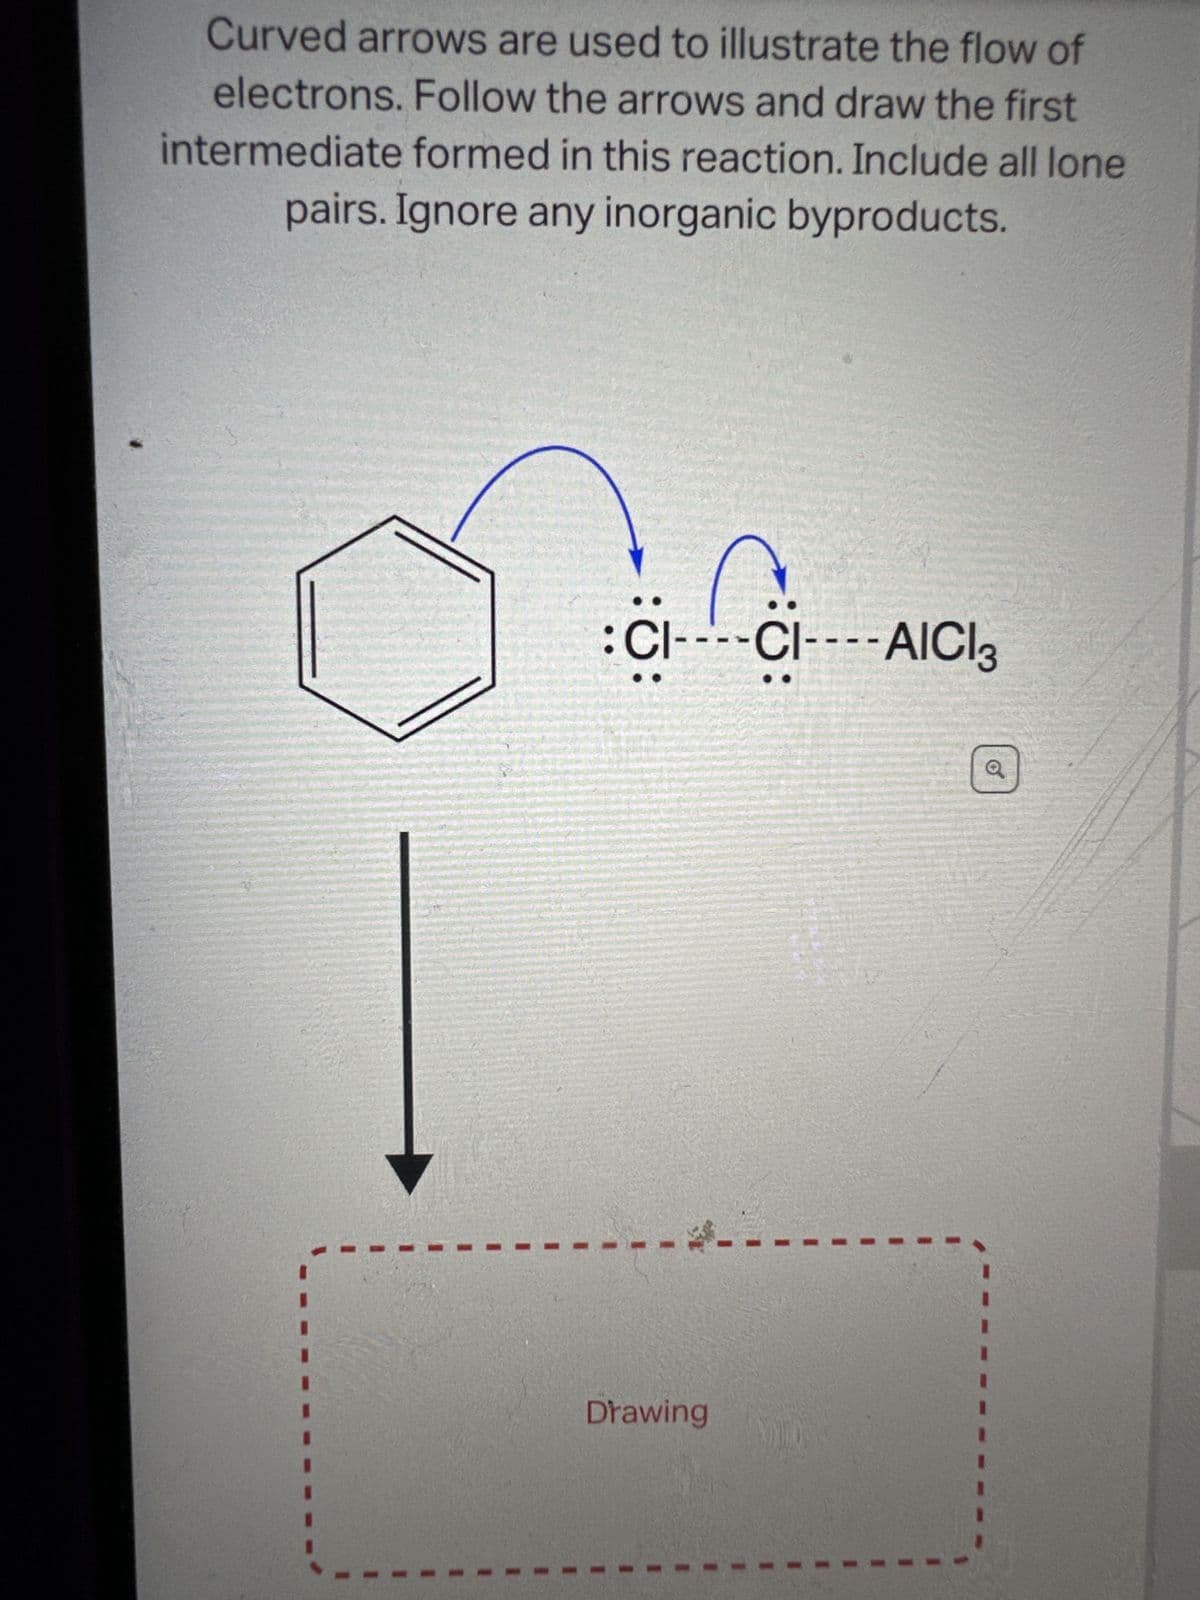 Curved arrows are used to illustrate the flow of
electrons. Follow the arrows and draw the first
intermediate formed in this reaction. Include all lone
pairs. Ignore any inorganic byproducts.
CI----CI---- AICI 3
Drawing
Q